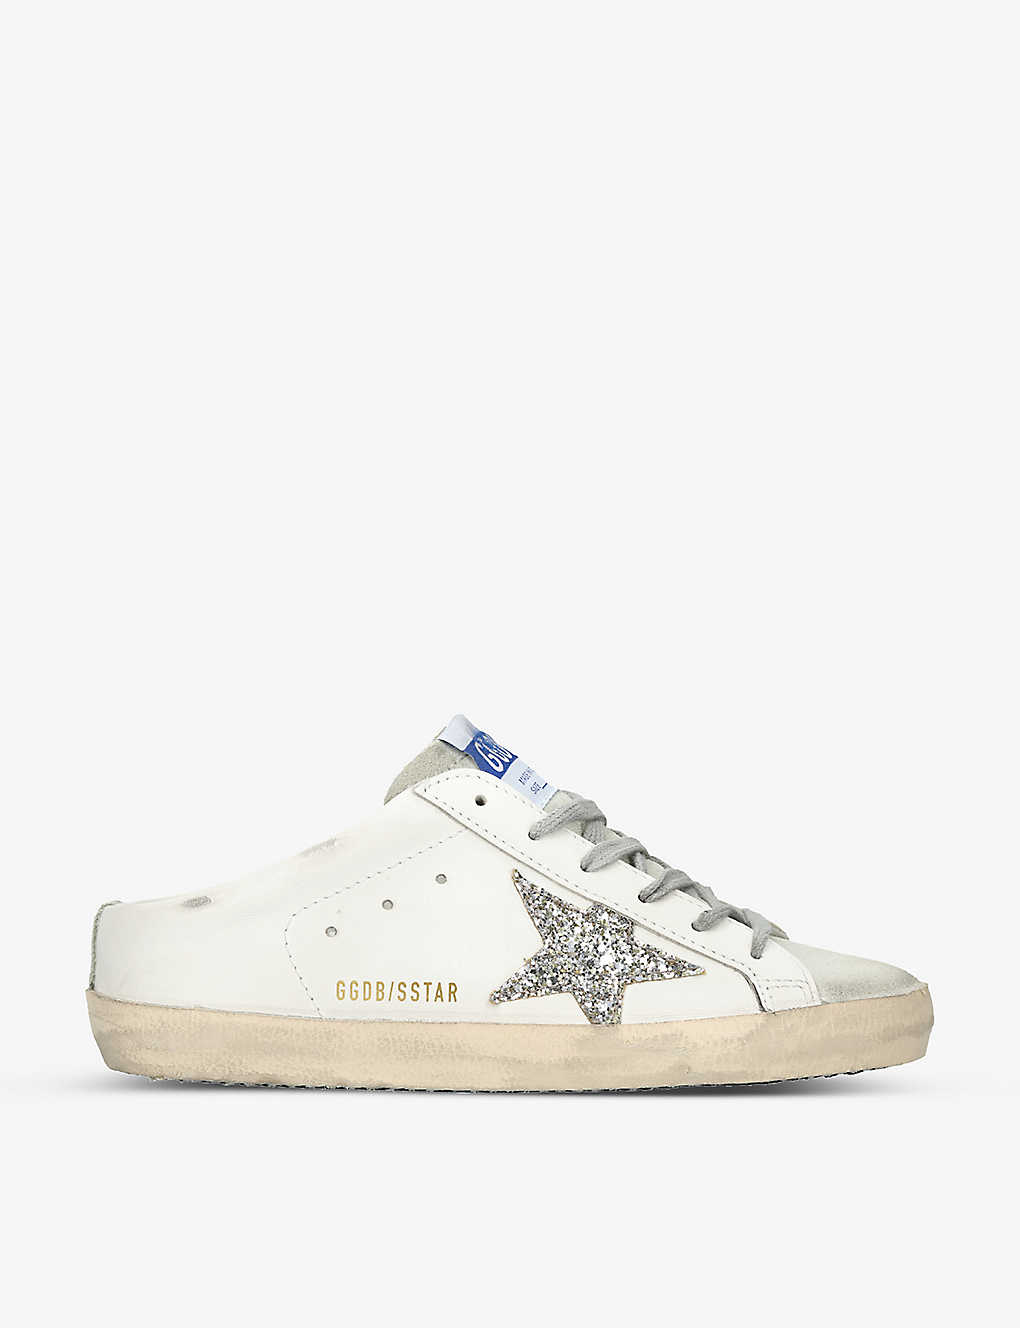 Golden Goose Super-star Sabot 81194 Leather Trainers In White/oth